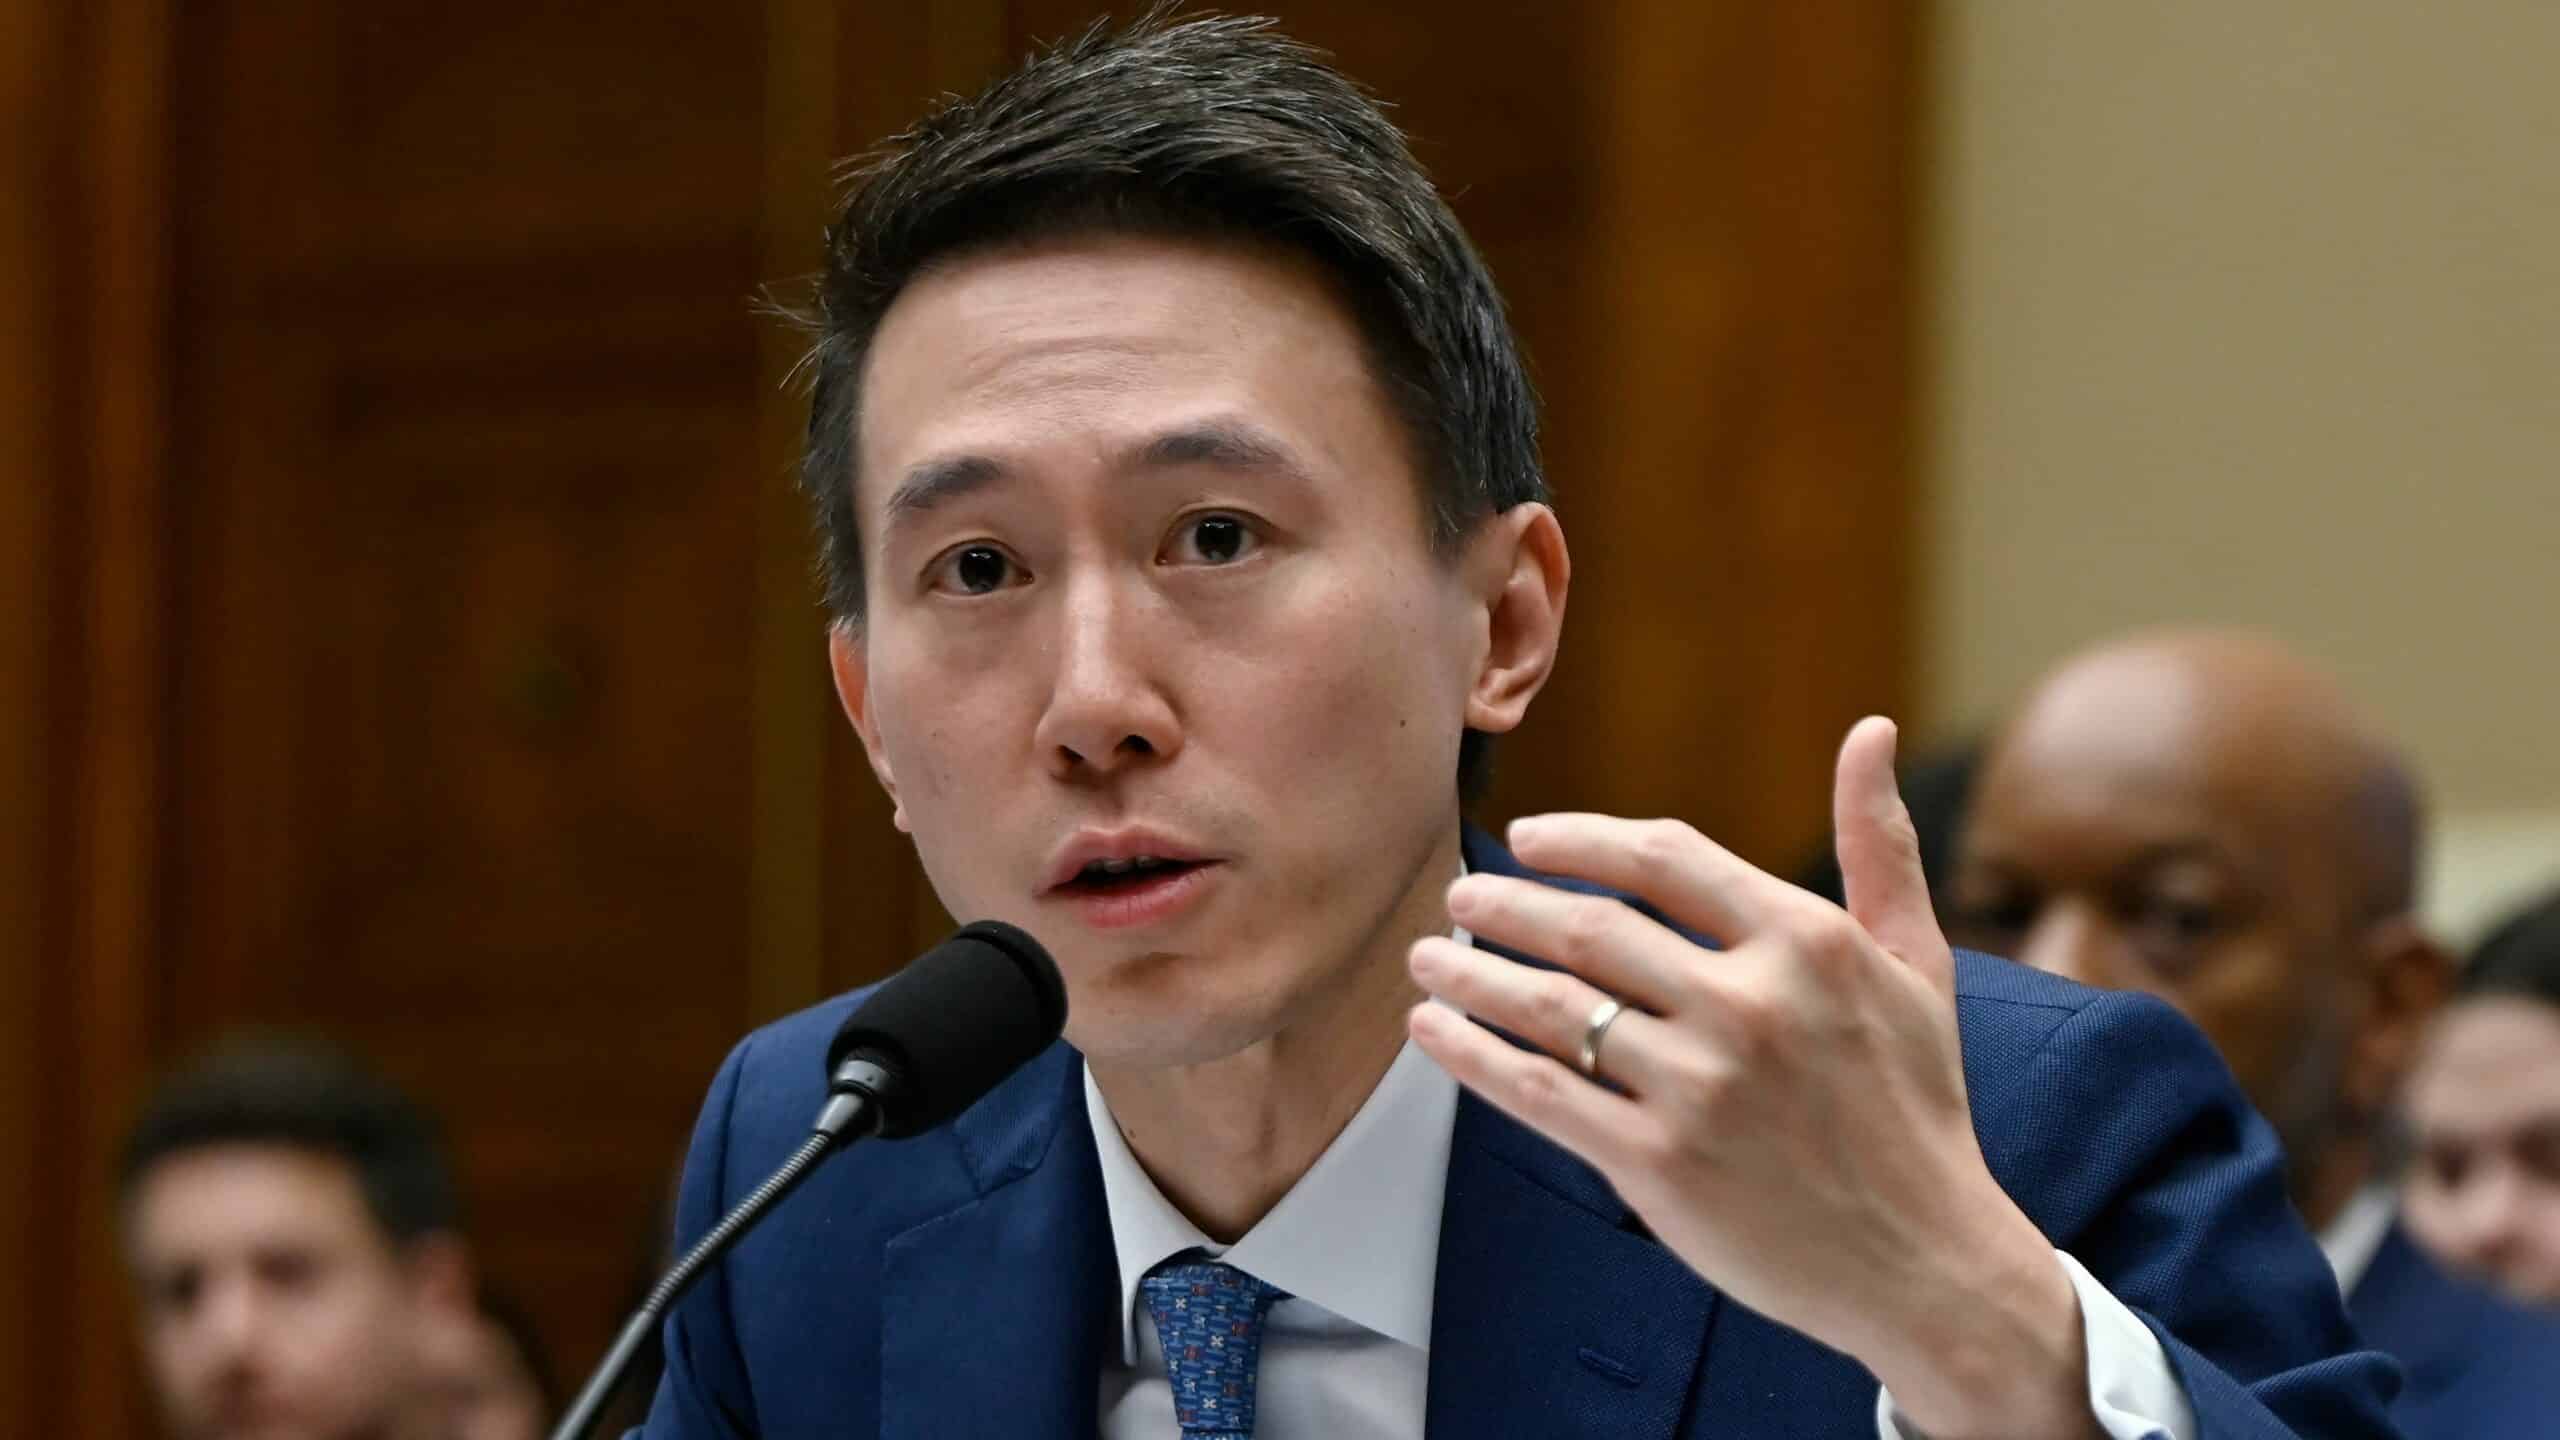 TikTok CEO Shou Zi Chew testifies before the House Energy and Commerce Committee hearing on "TikTok: How Congress Can Safeguard American Data Privacy and Protect Children from Online Harms," on Capitol Hill, March 23, 2023, in Washington, DC.